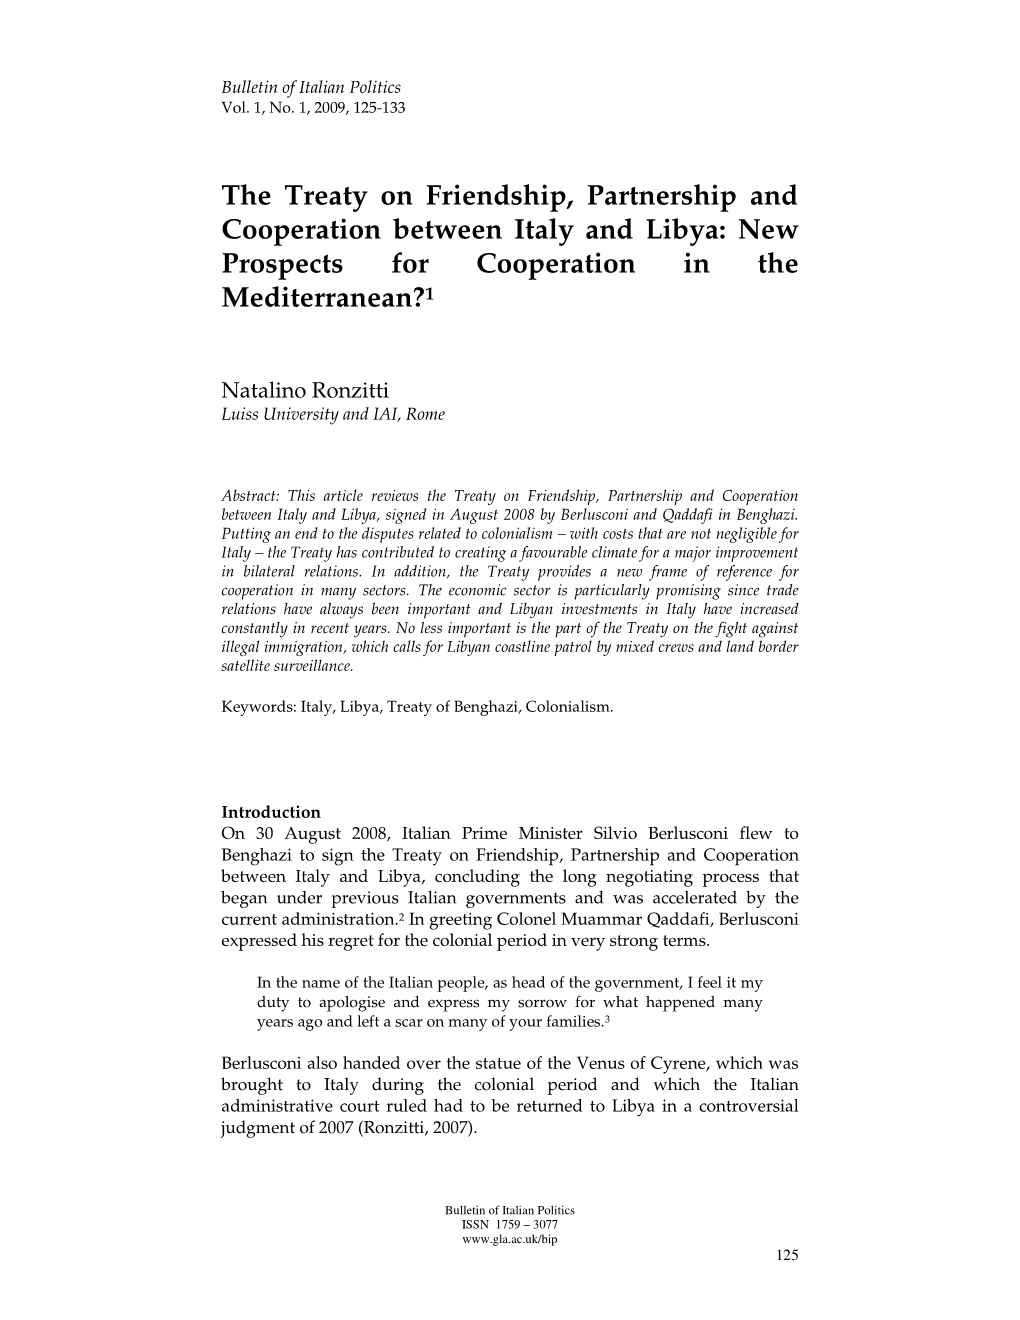 The Treaty on Friendship, Partnership and Cooperation Between Italy and Libya: New Prospects for Cooperation in the Mediterranean? 1